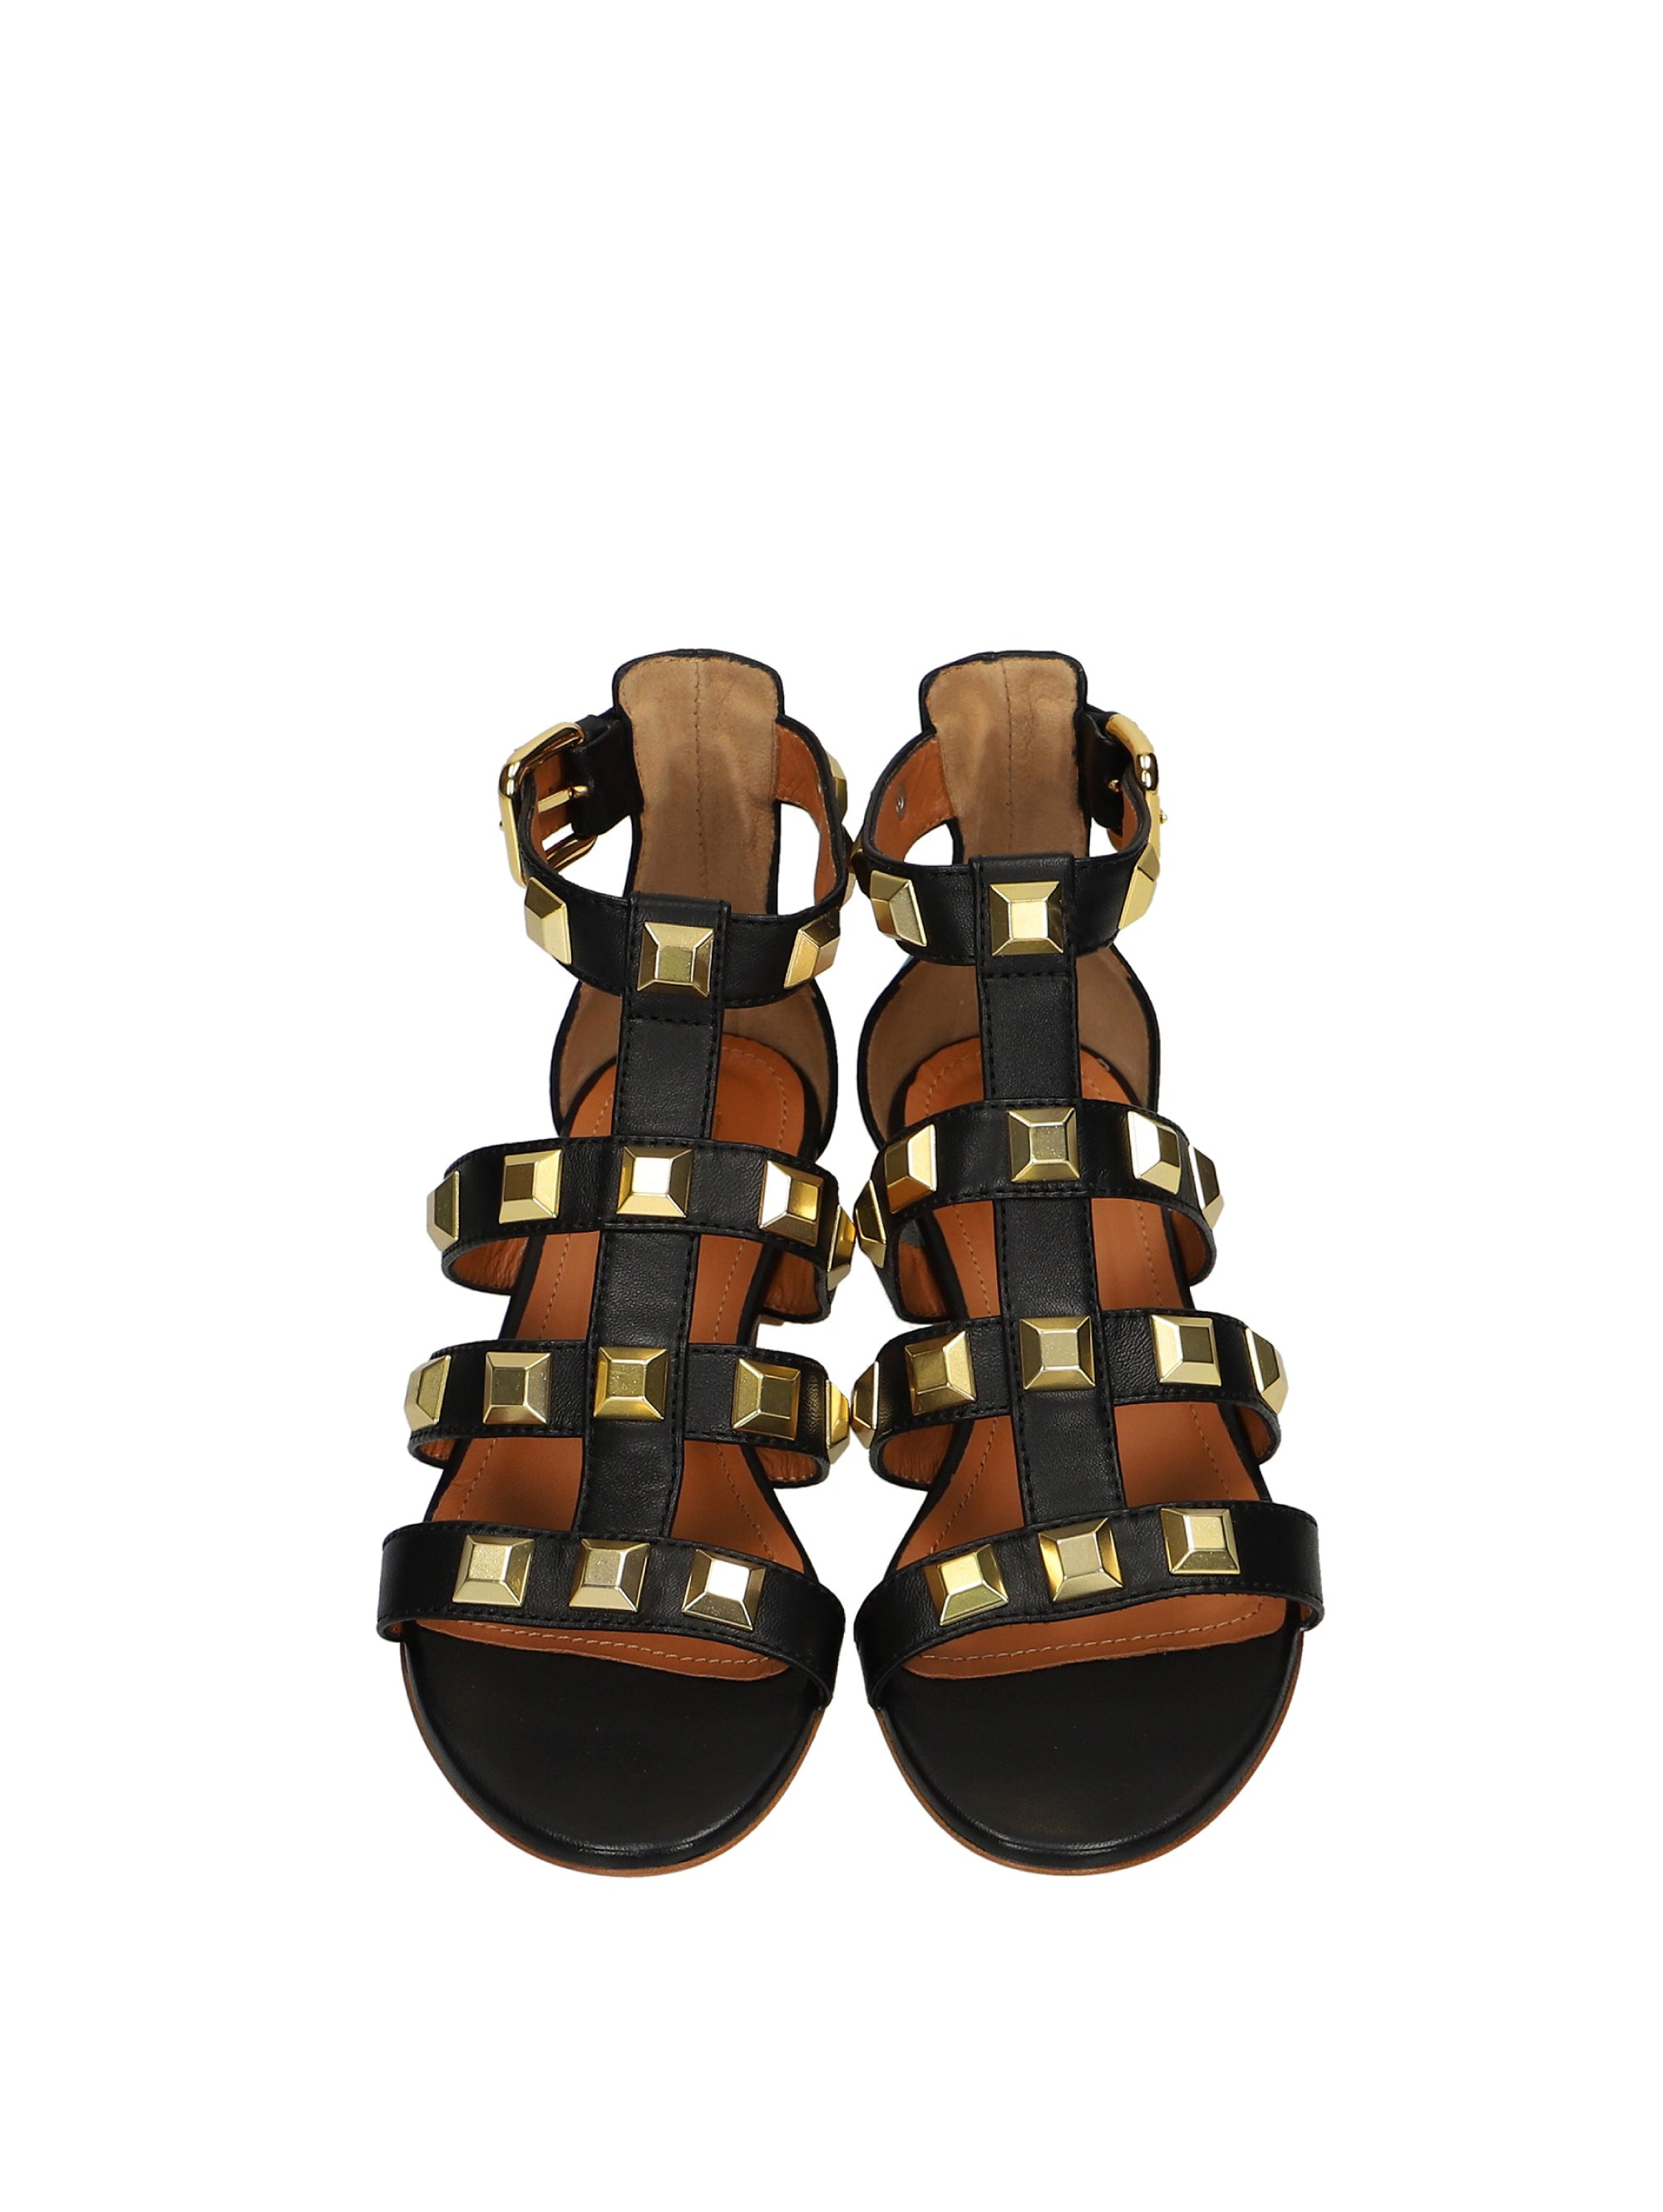 Sandals with Black Bands and Studs